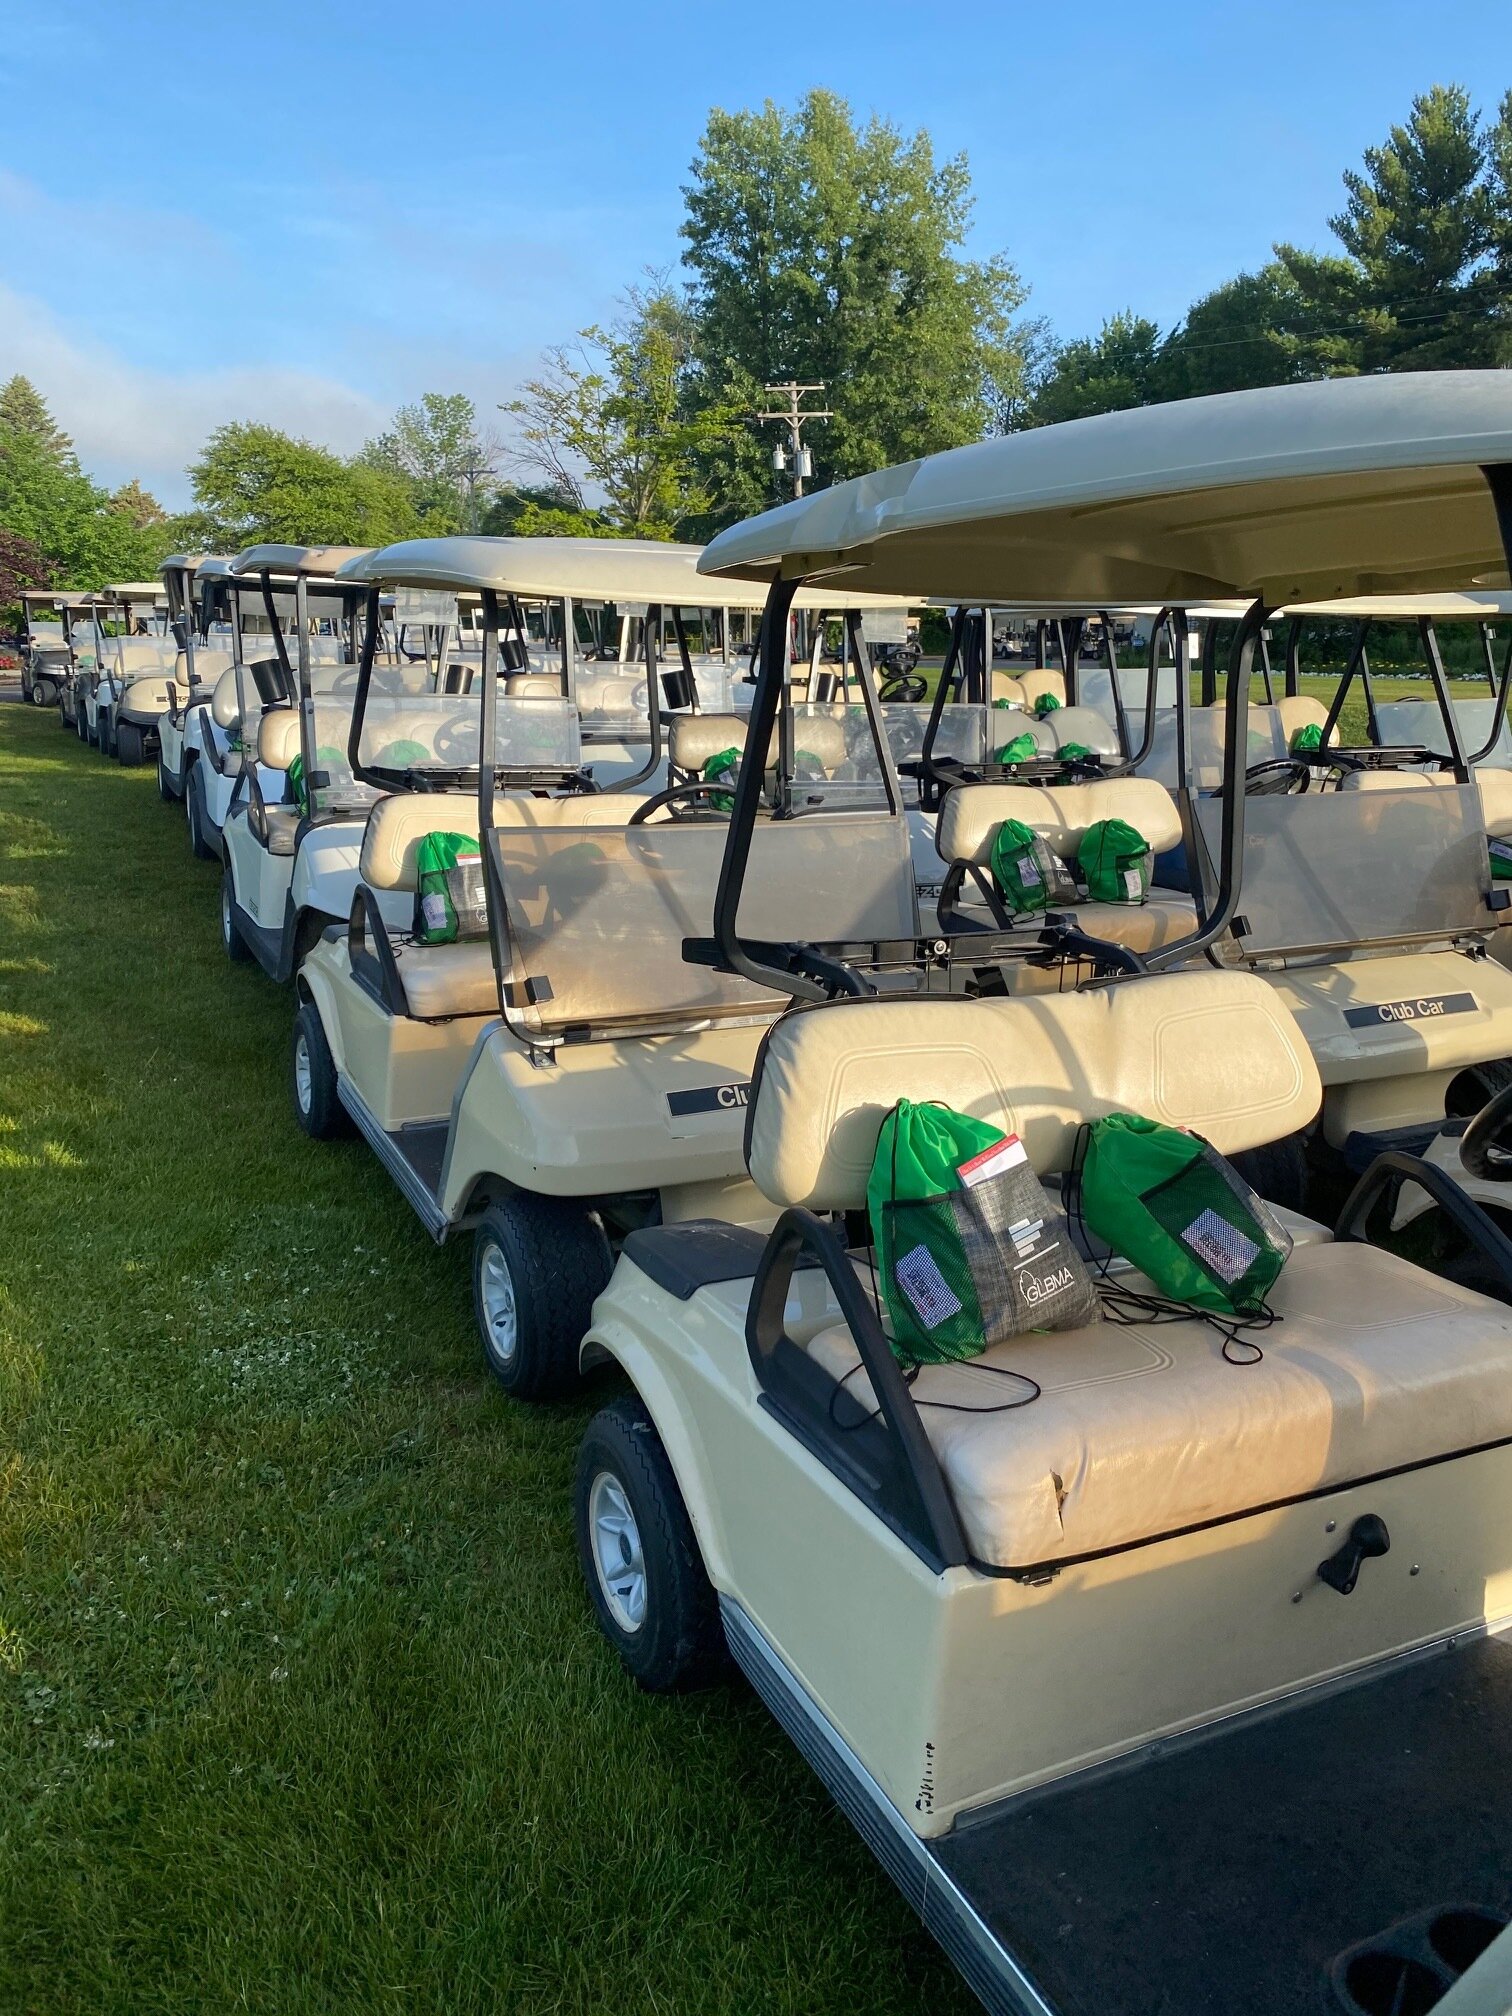 GLBMA Golf Outing 2021 - golf carts lined up.jpg